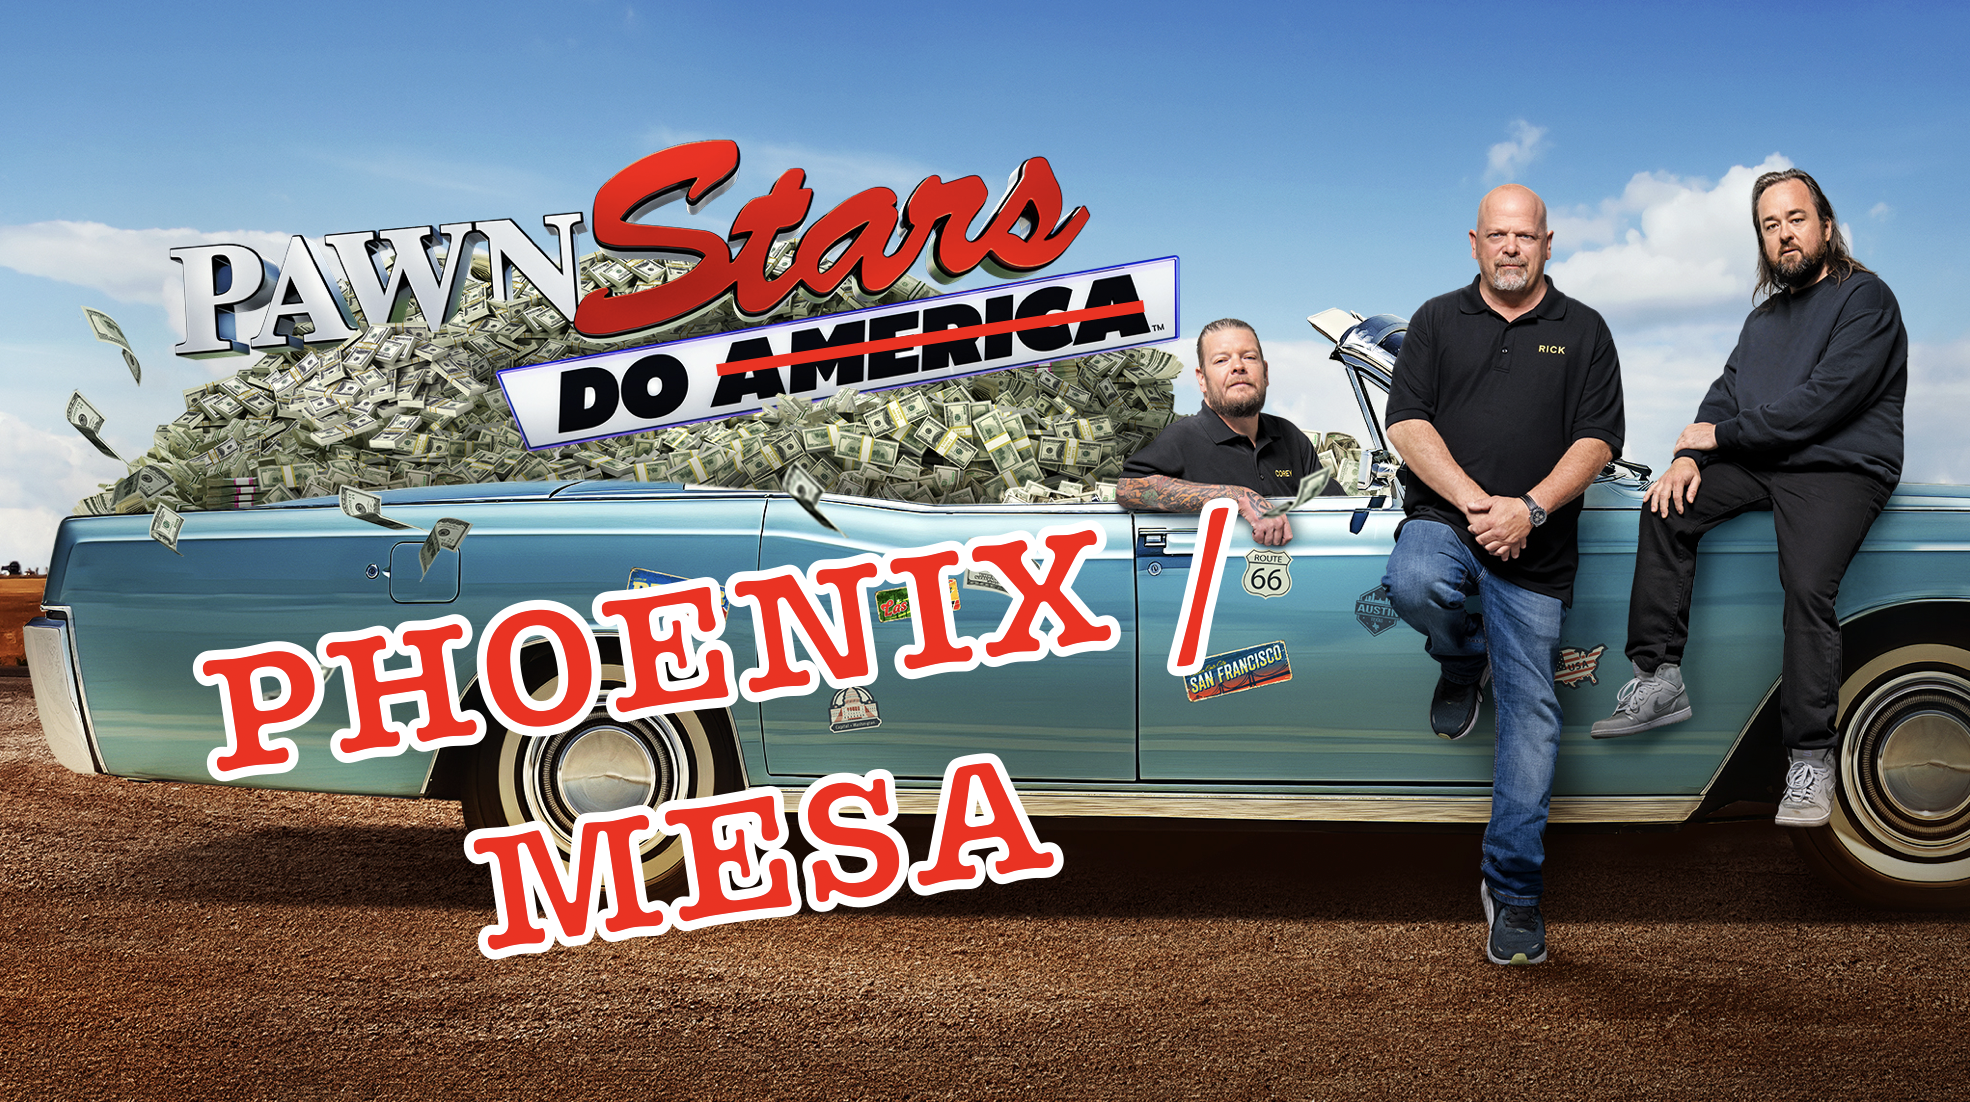 Fans can watch 'Pawn Stars' show taping in Phoenix, Mesa